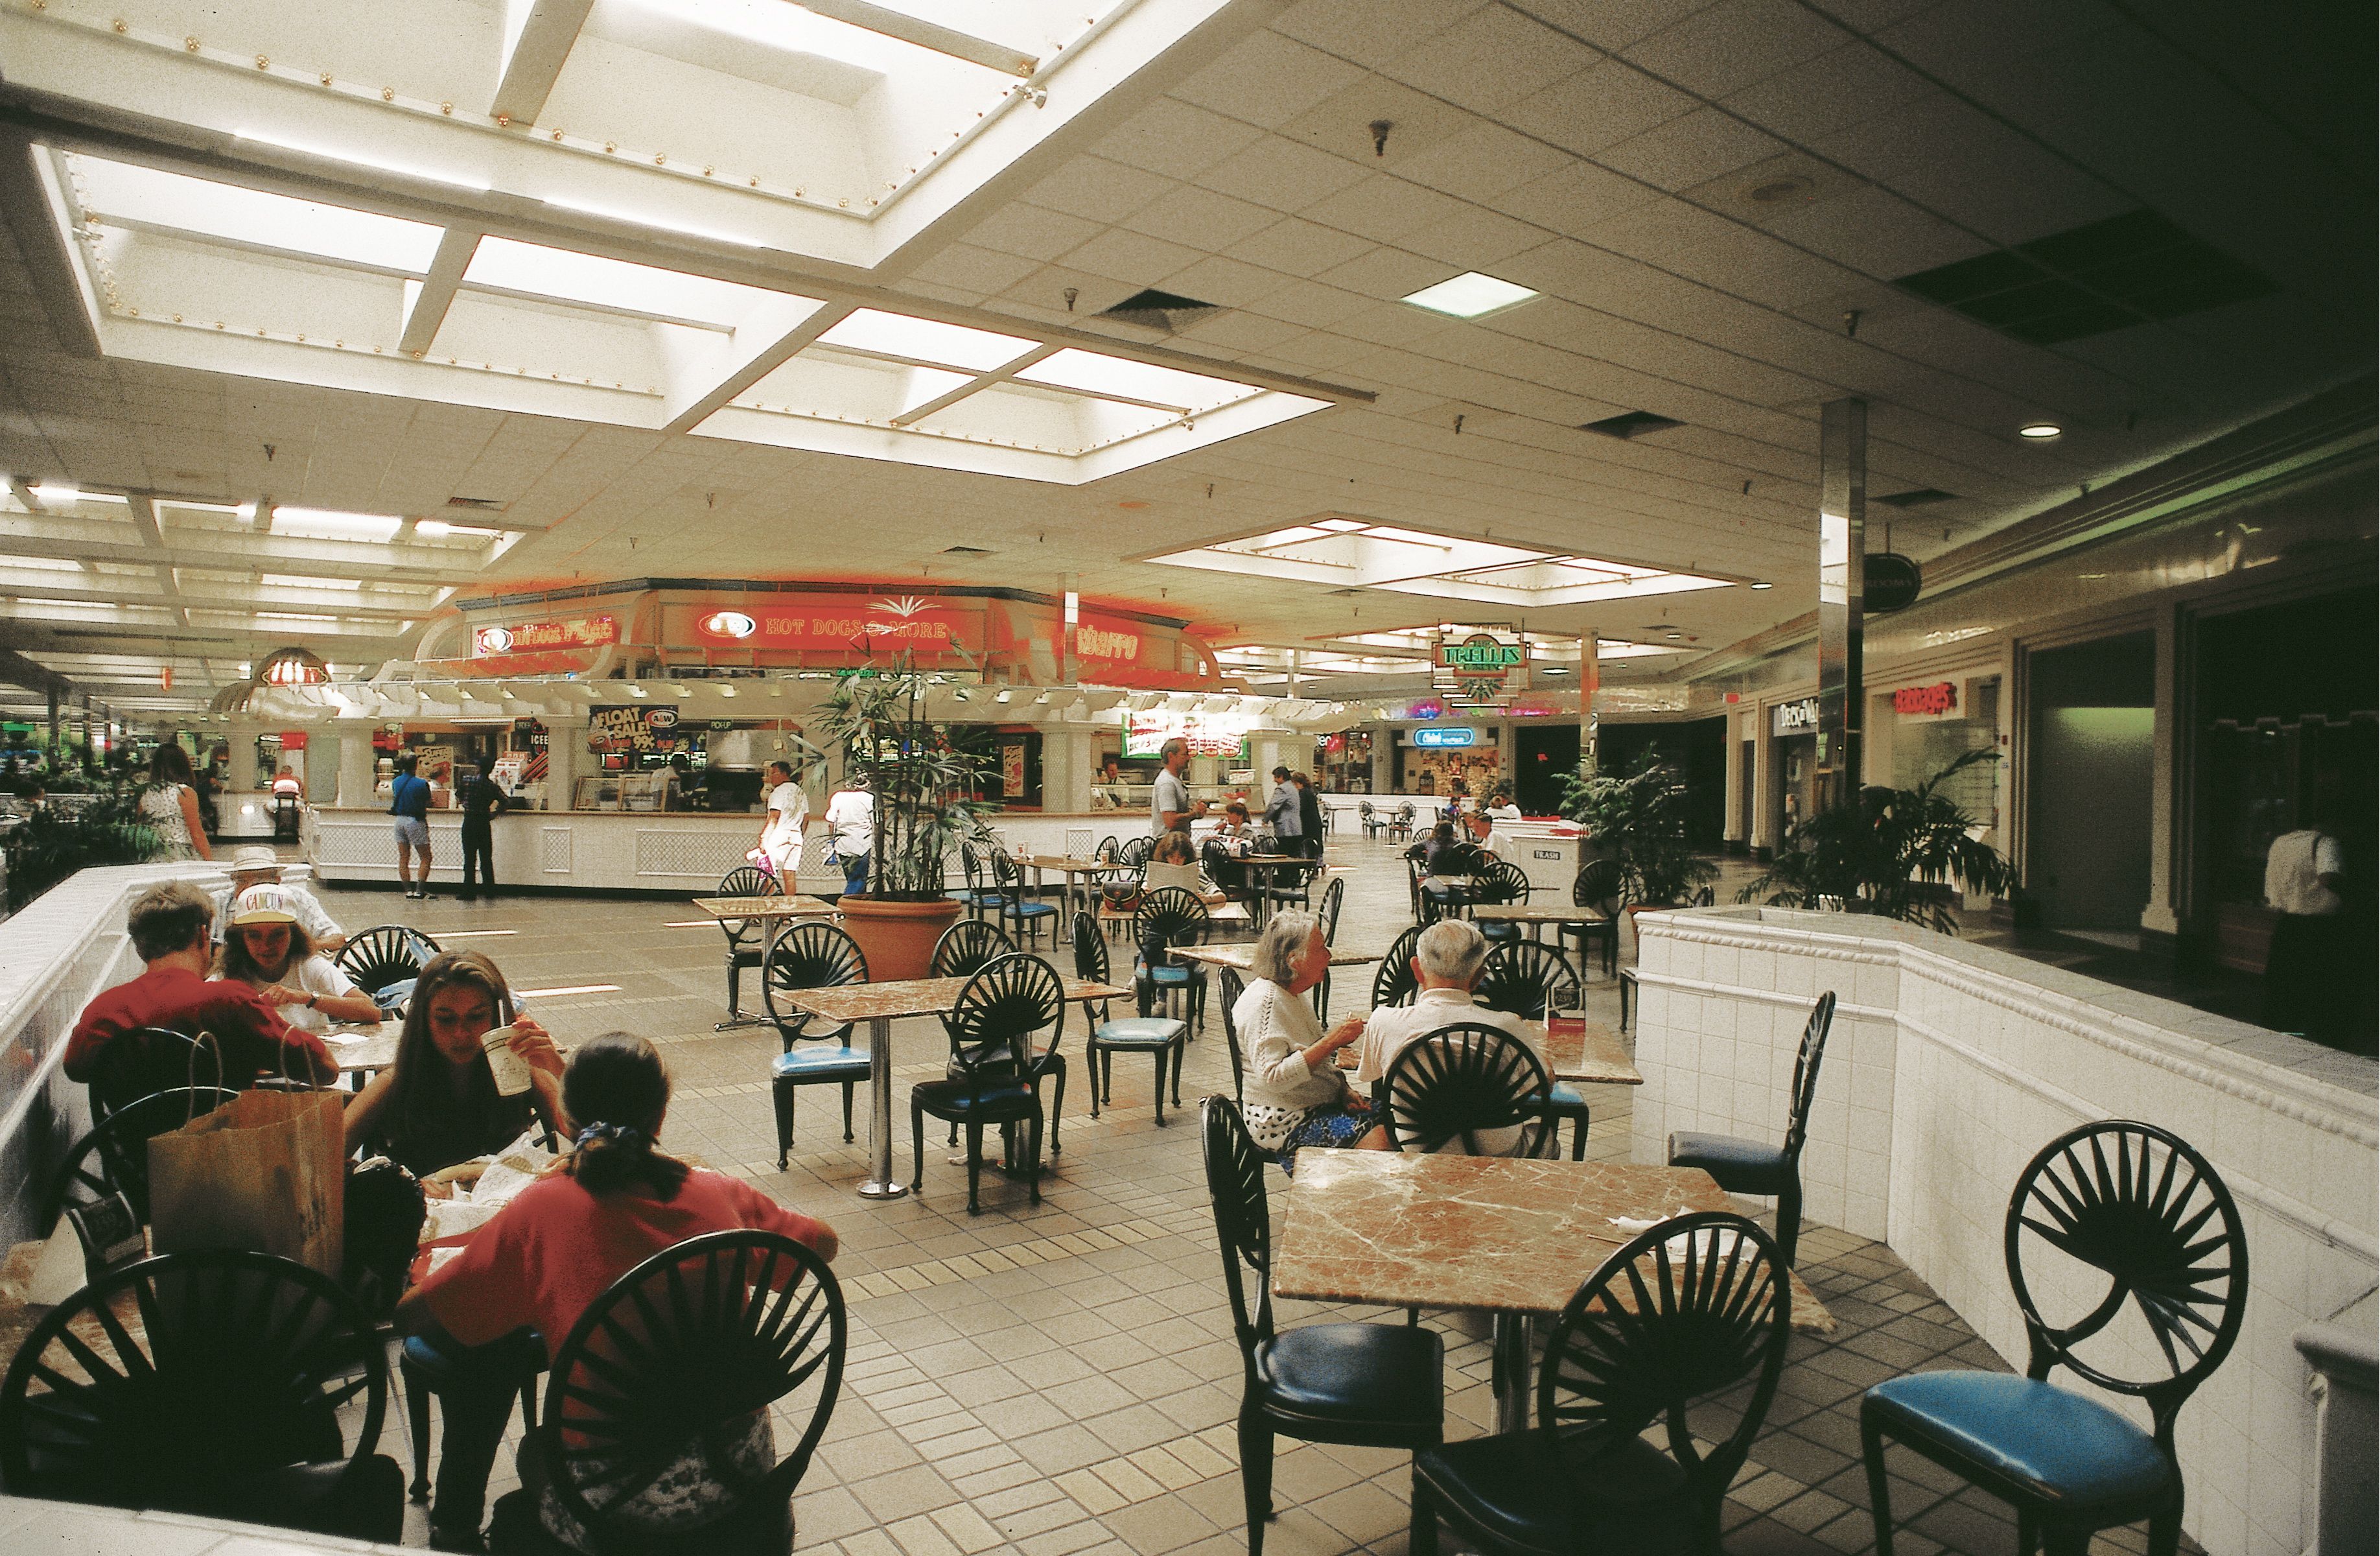 Malls Are Dying Out, These Photos Capture Classic Mall Memories